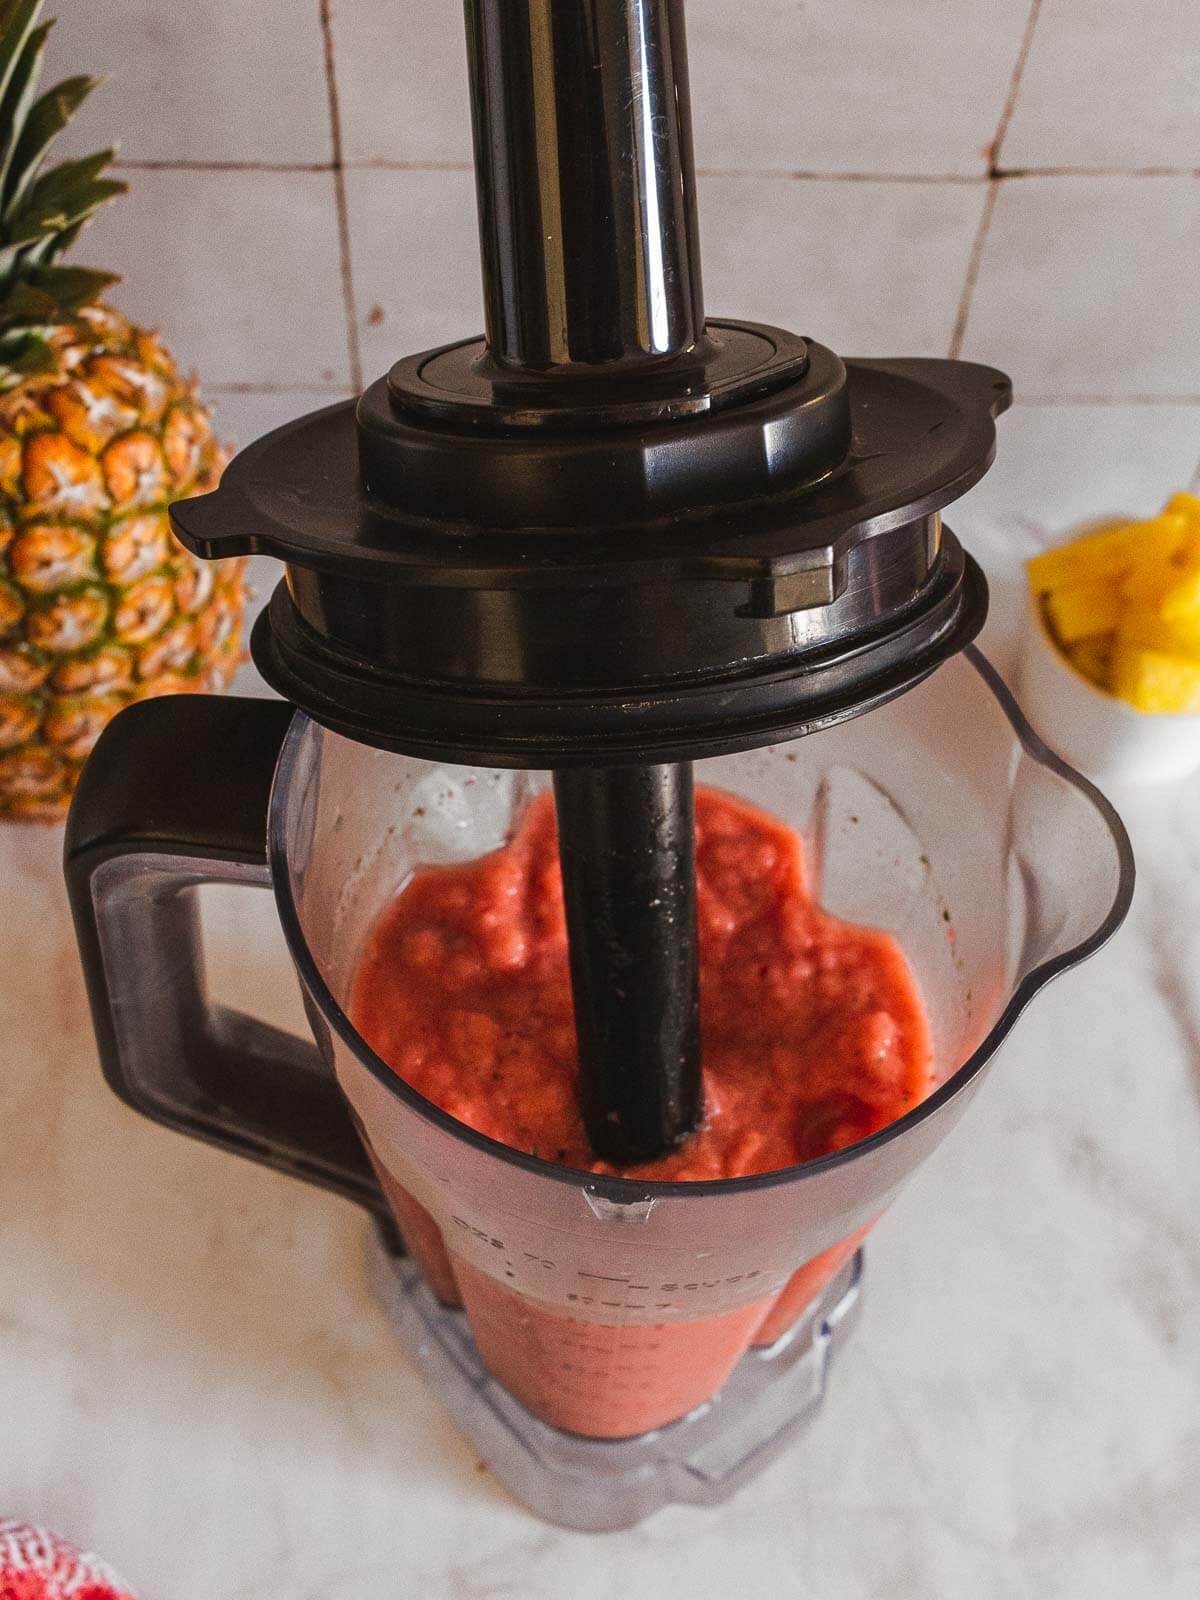 use the tamper to facilitate the blender's job